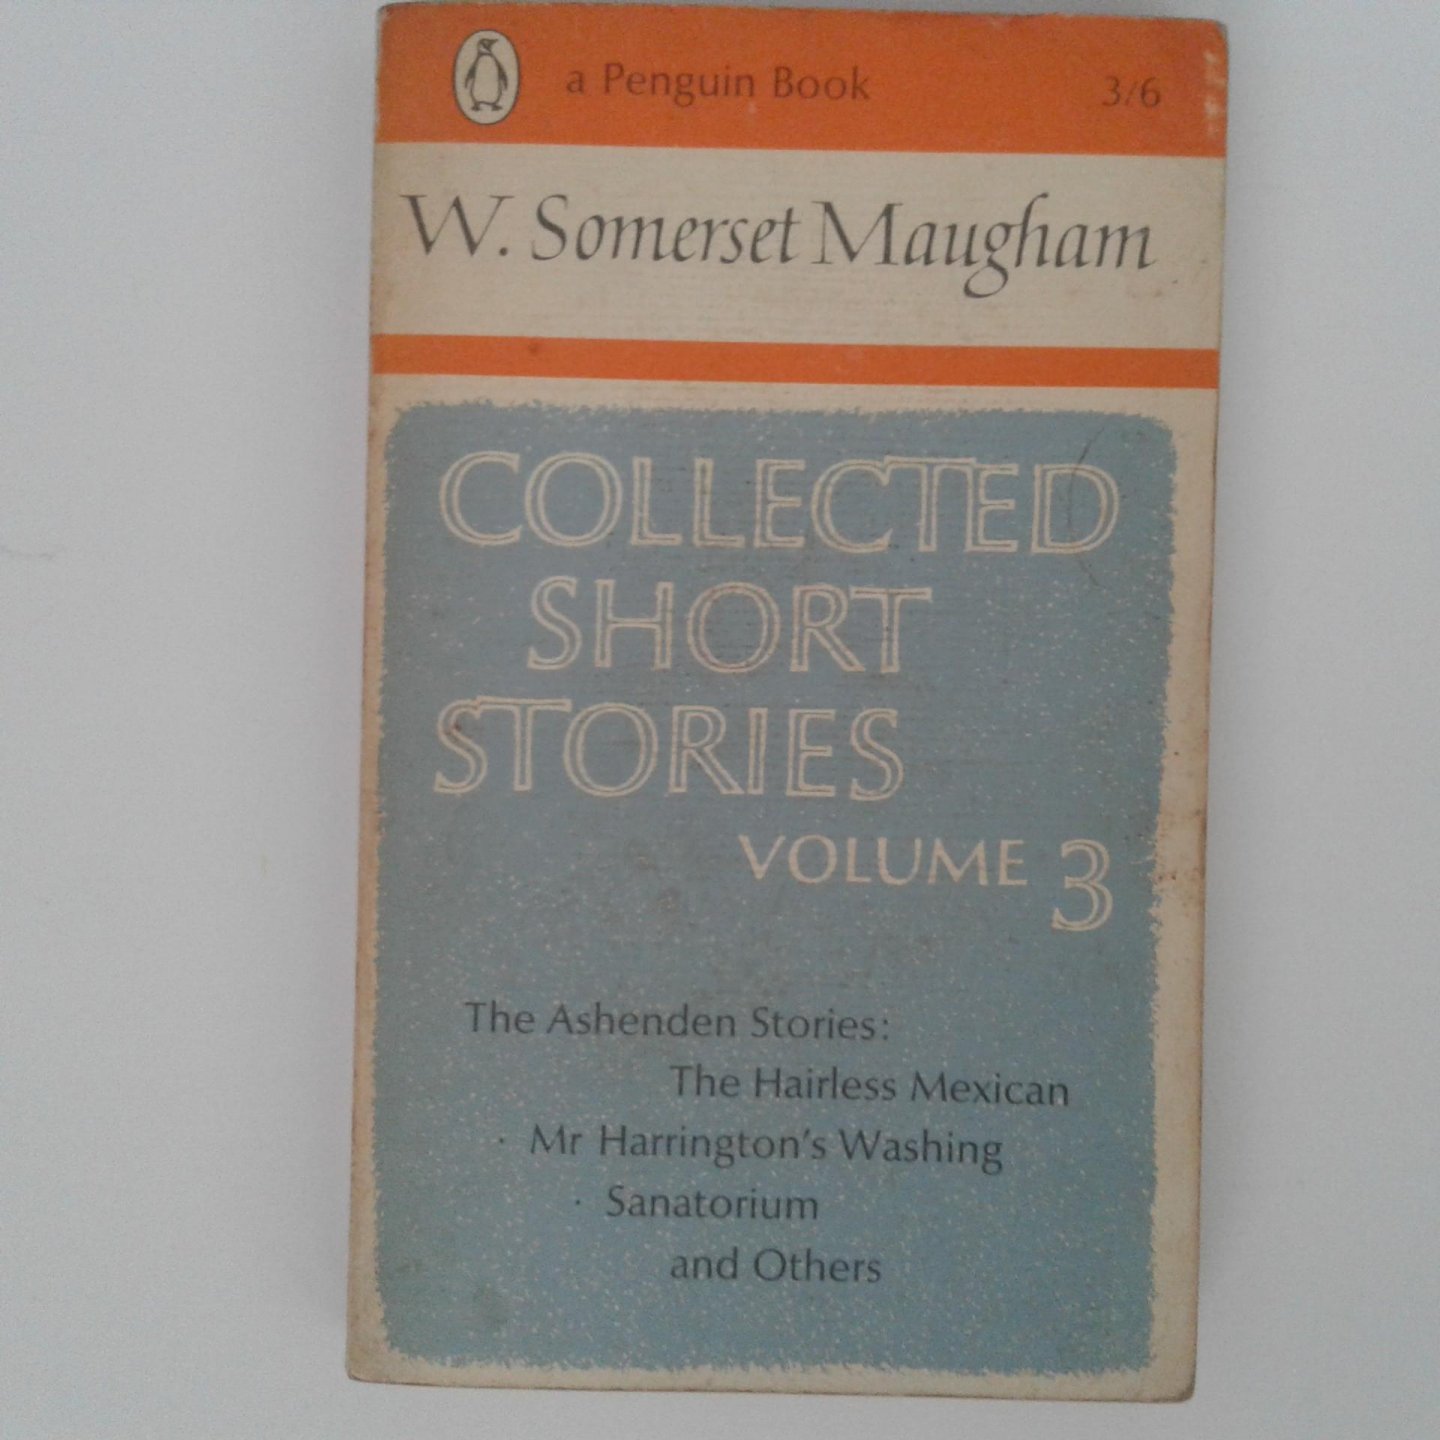 Maugham, W. Somerset - Collected short stories volume 3